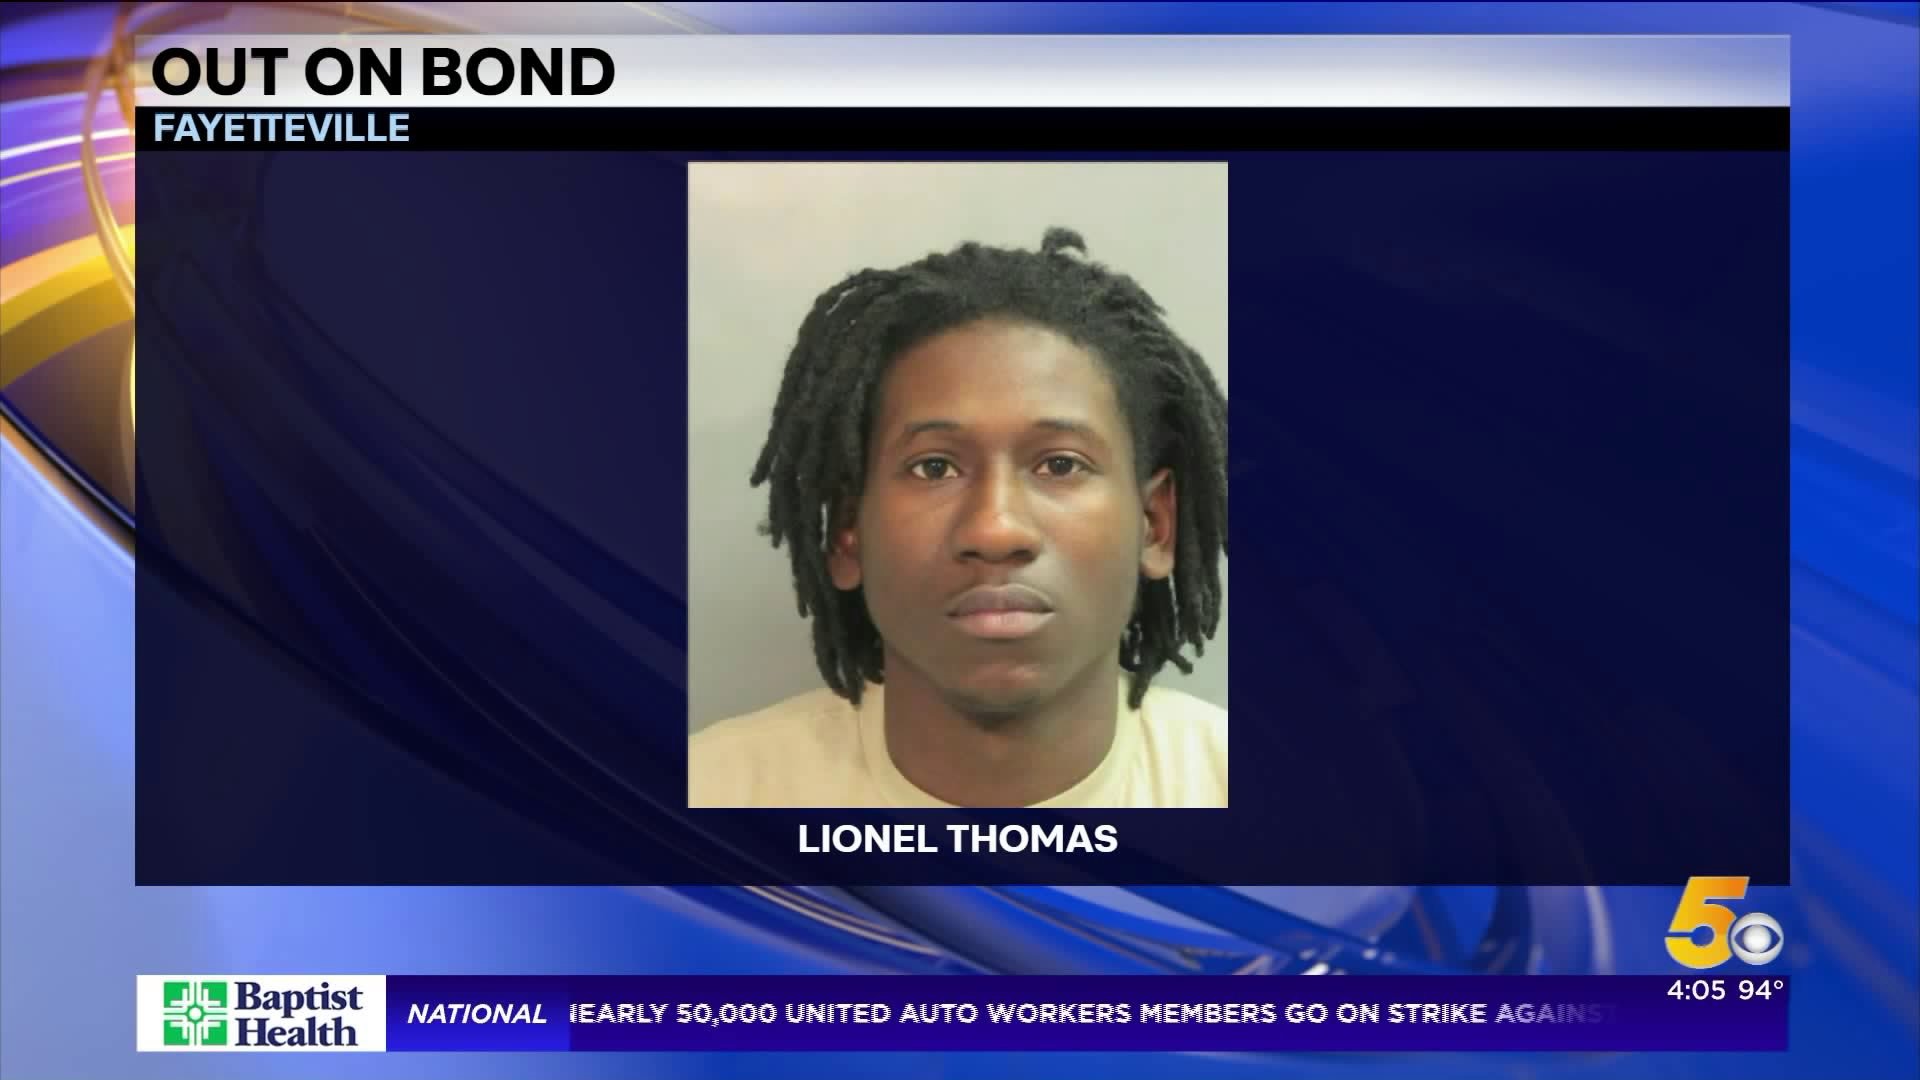 Man Out on Bond After Shooting at Police